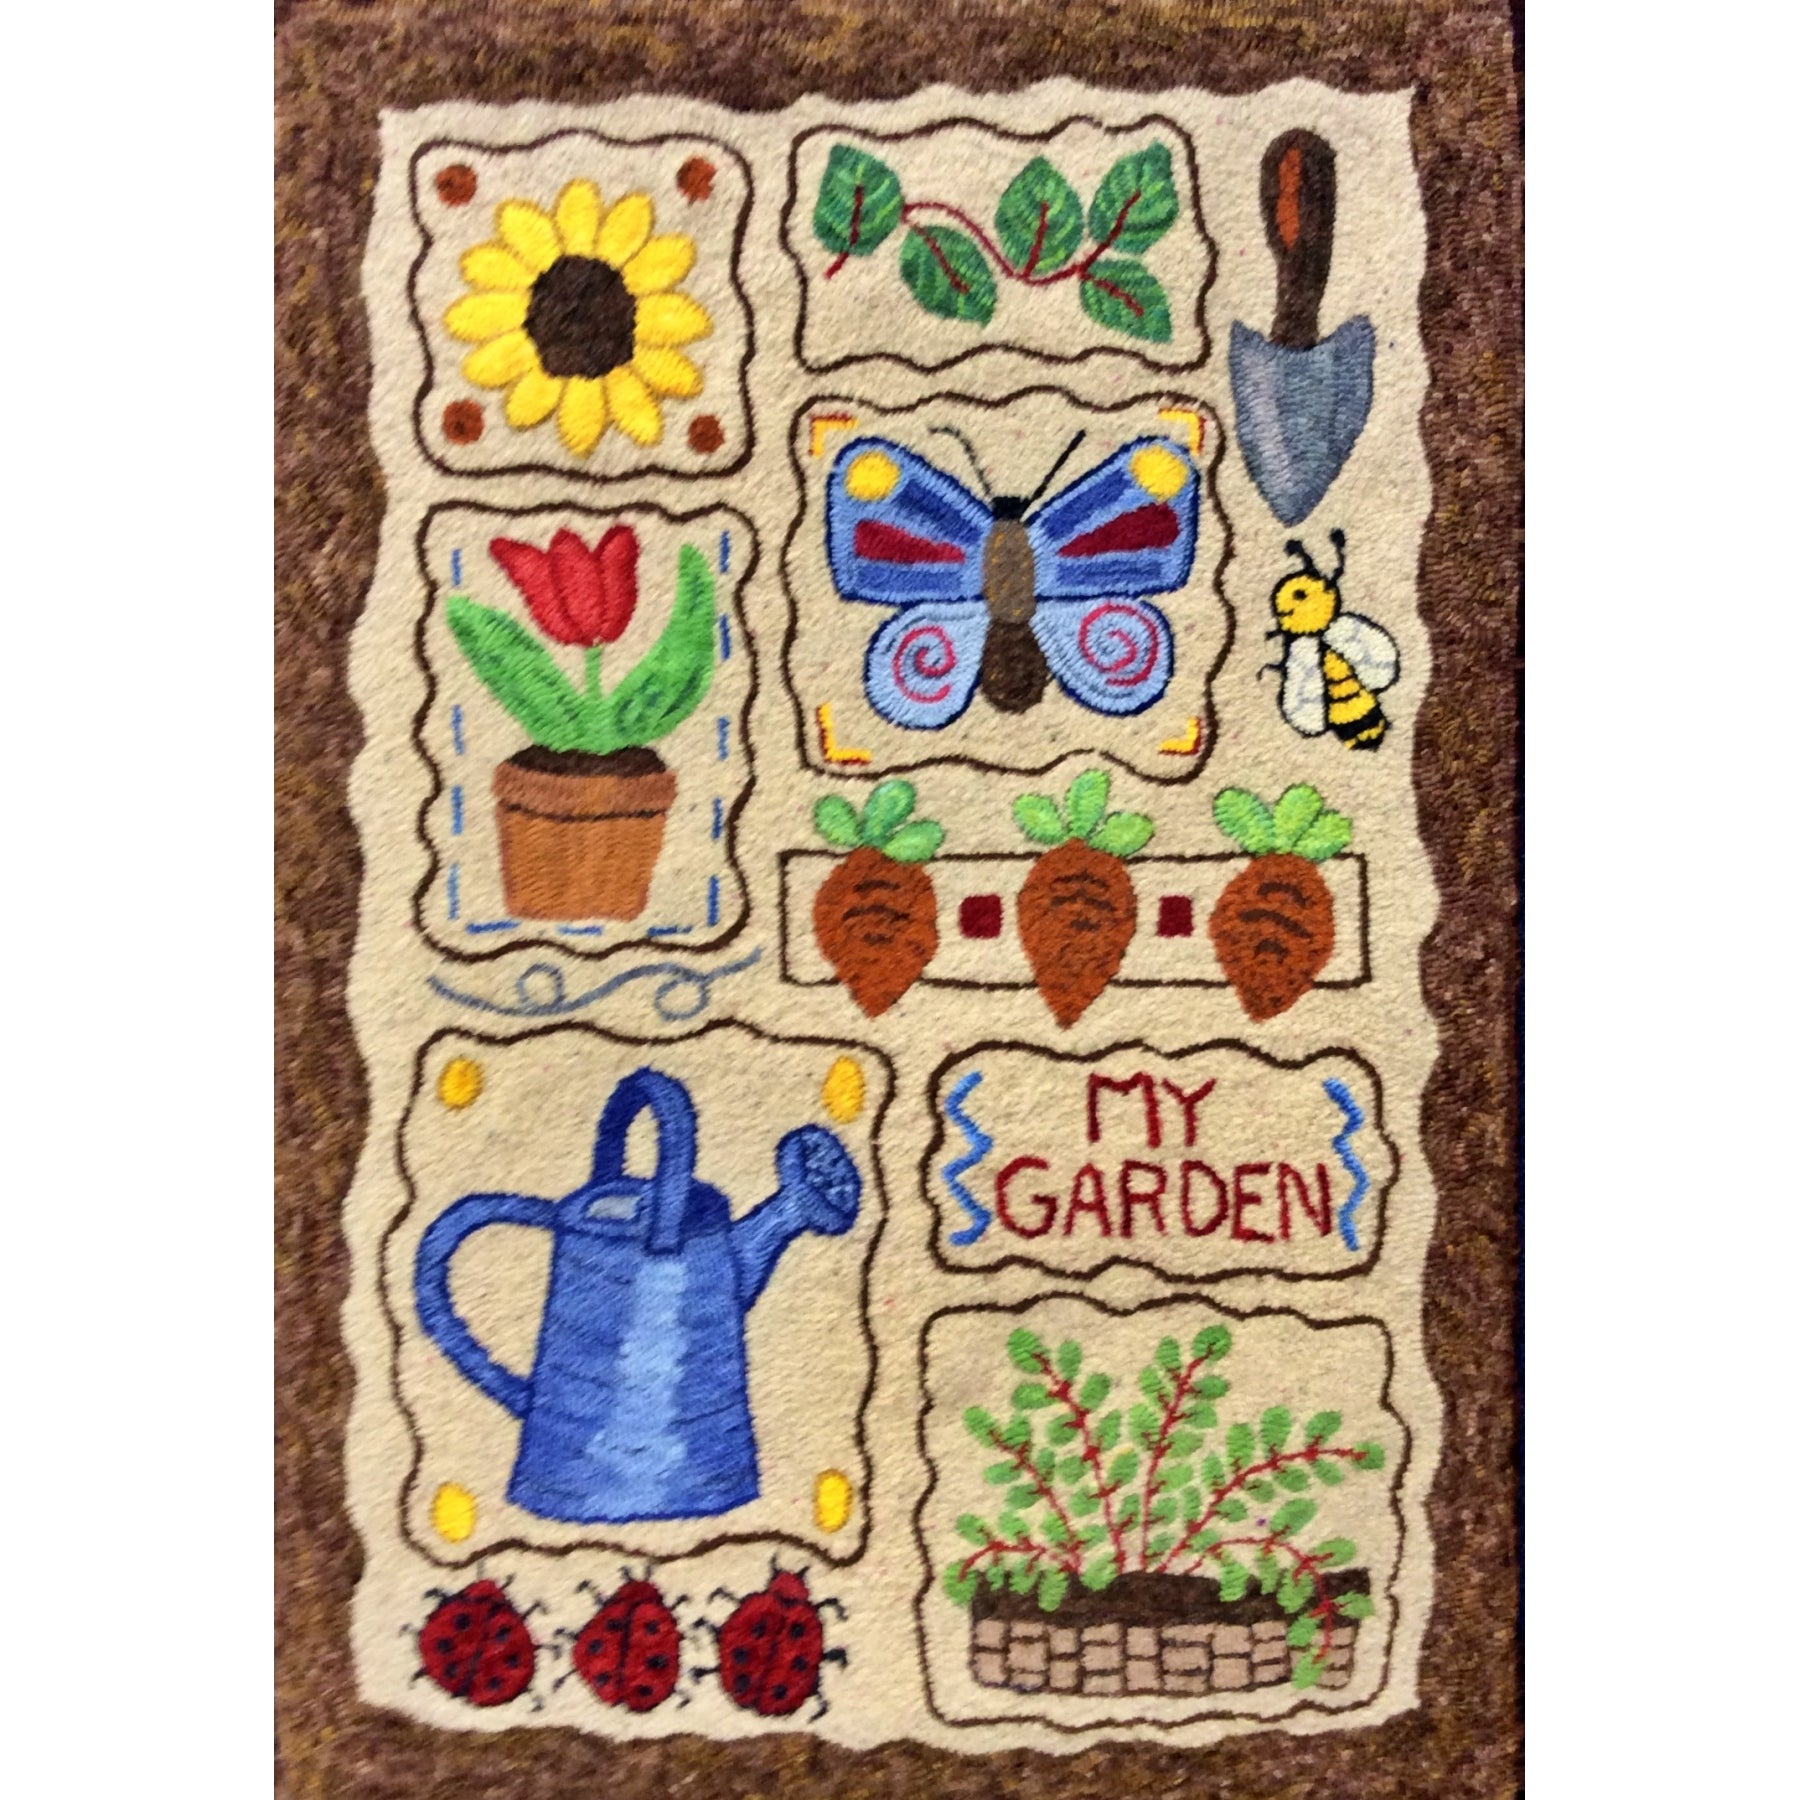 My Garden, rug hooked by Jean Brotherton